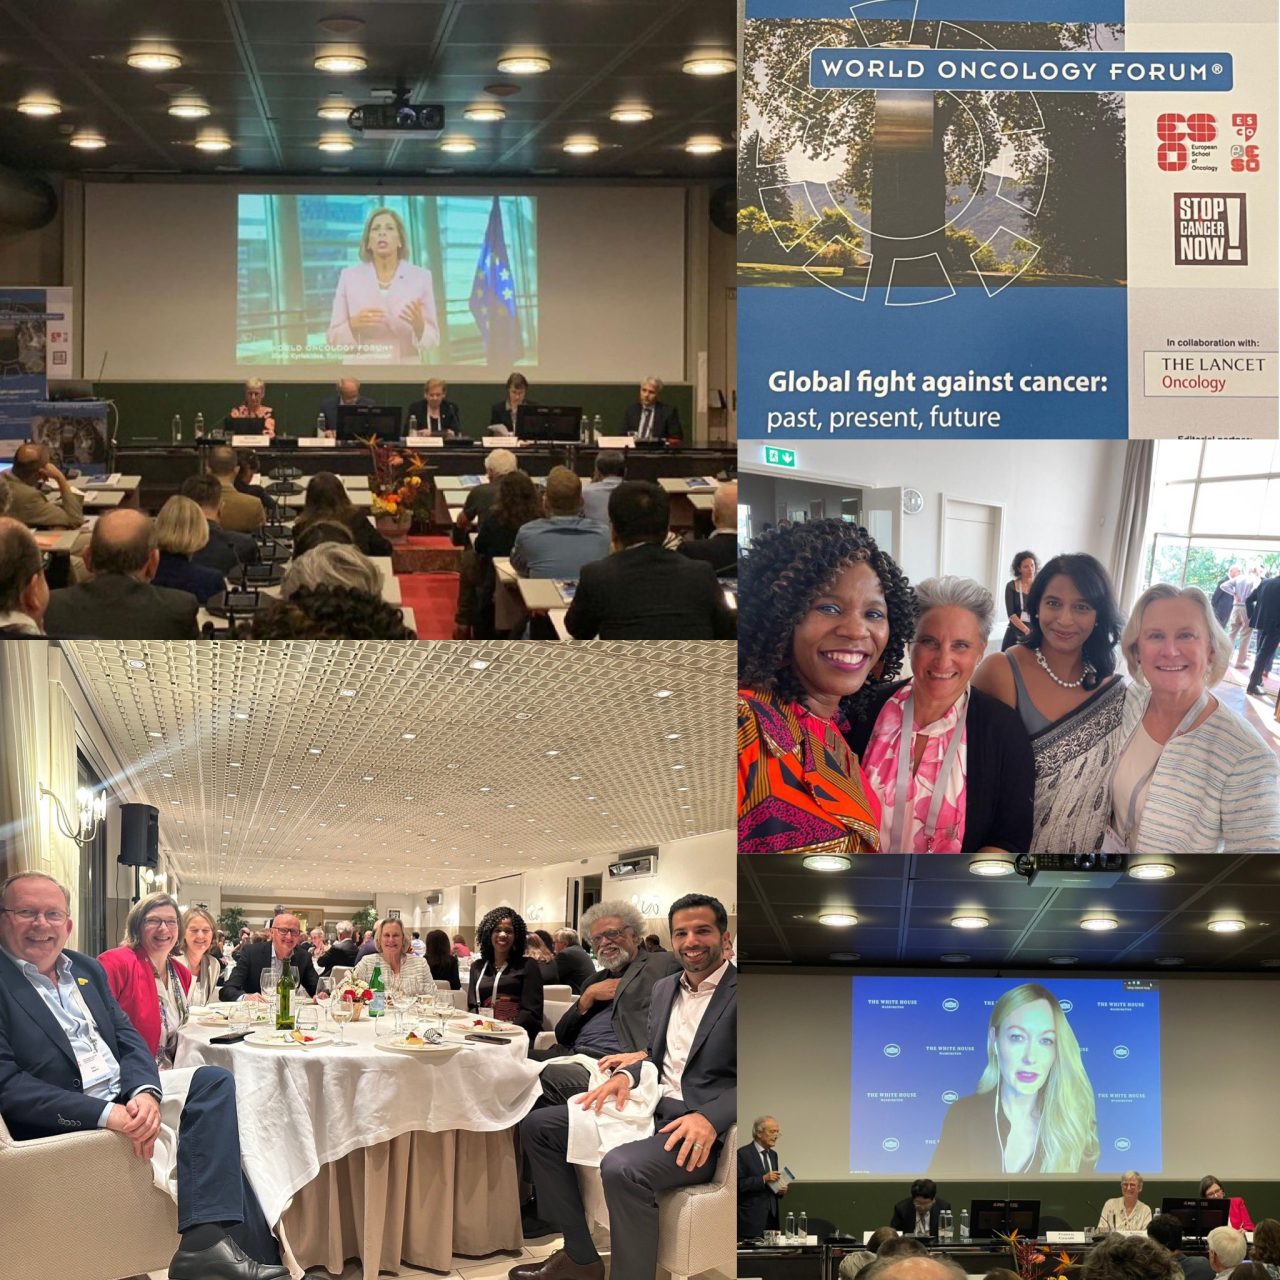 Julie Gralow: Busy 3 days at the World Oncology Forum in Ascona, Switzerland.